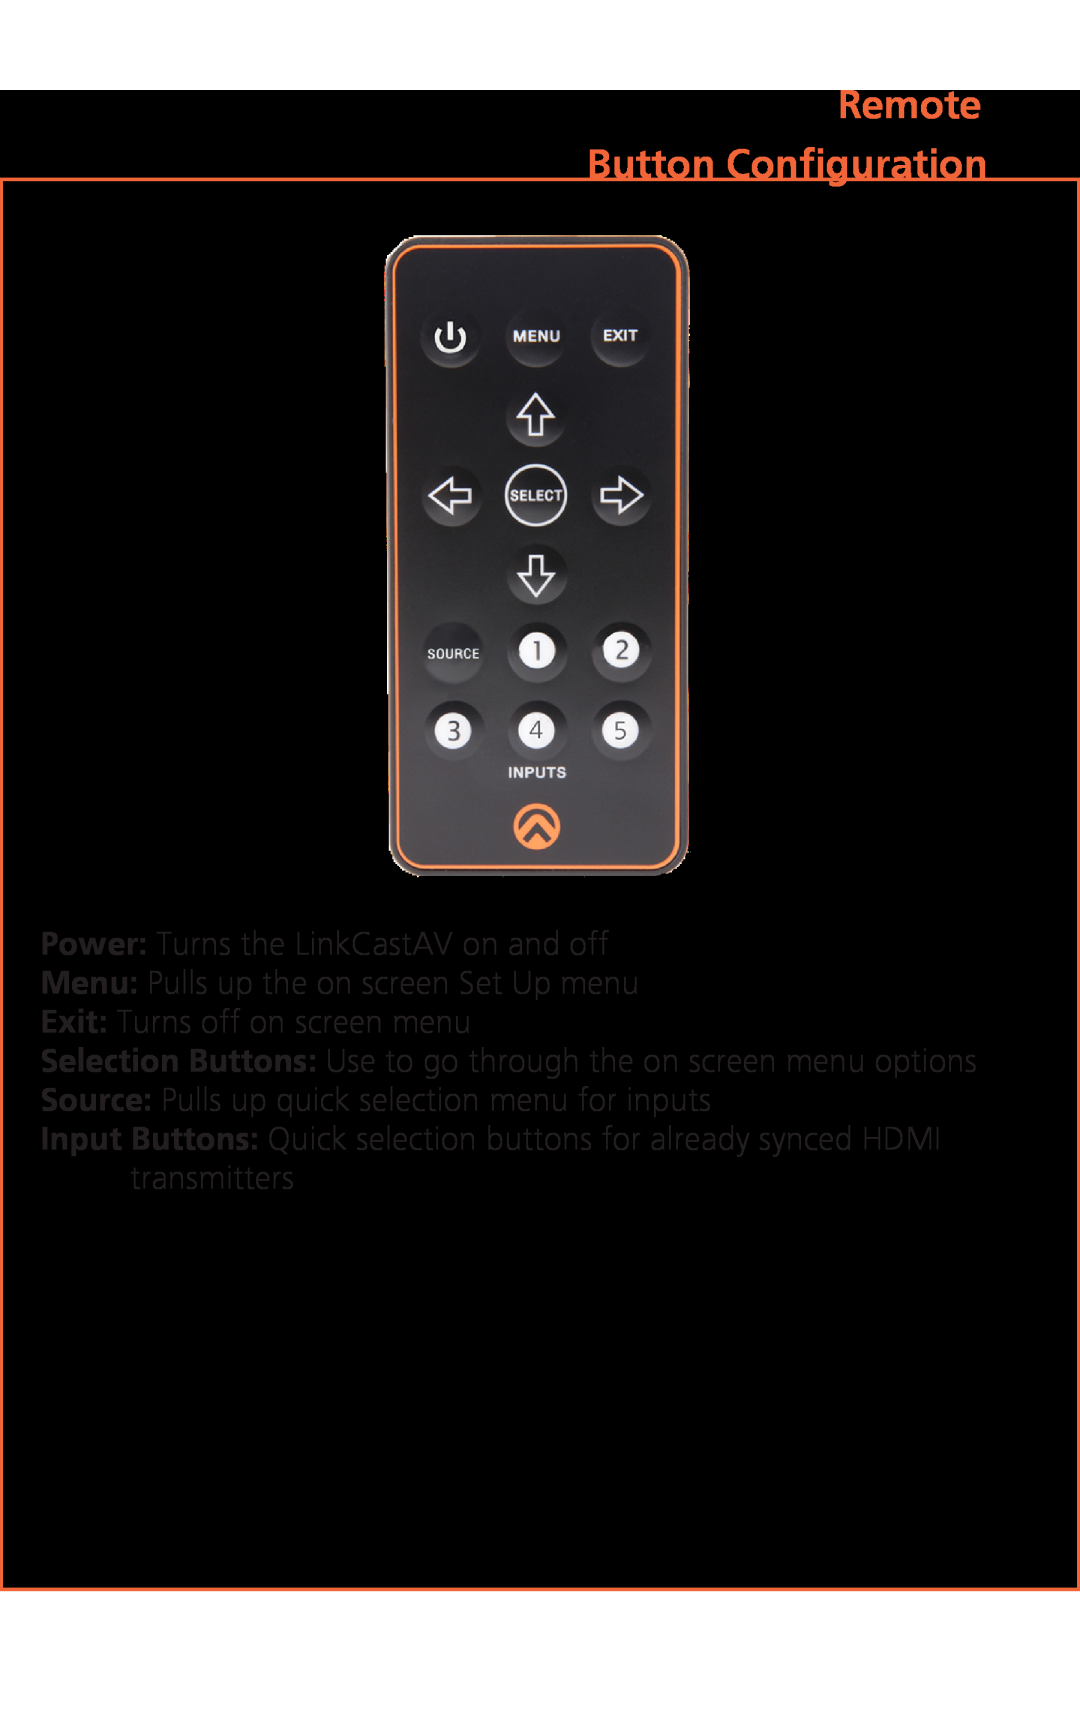 Atlona Rev. 2.0 manual Remote Button Configuration, Power Turns the LinkCastAV on and off, Exit Turns off on screen menu 